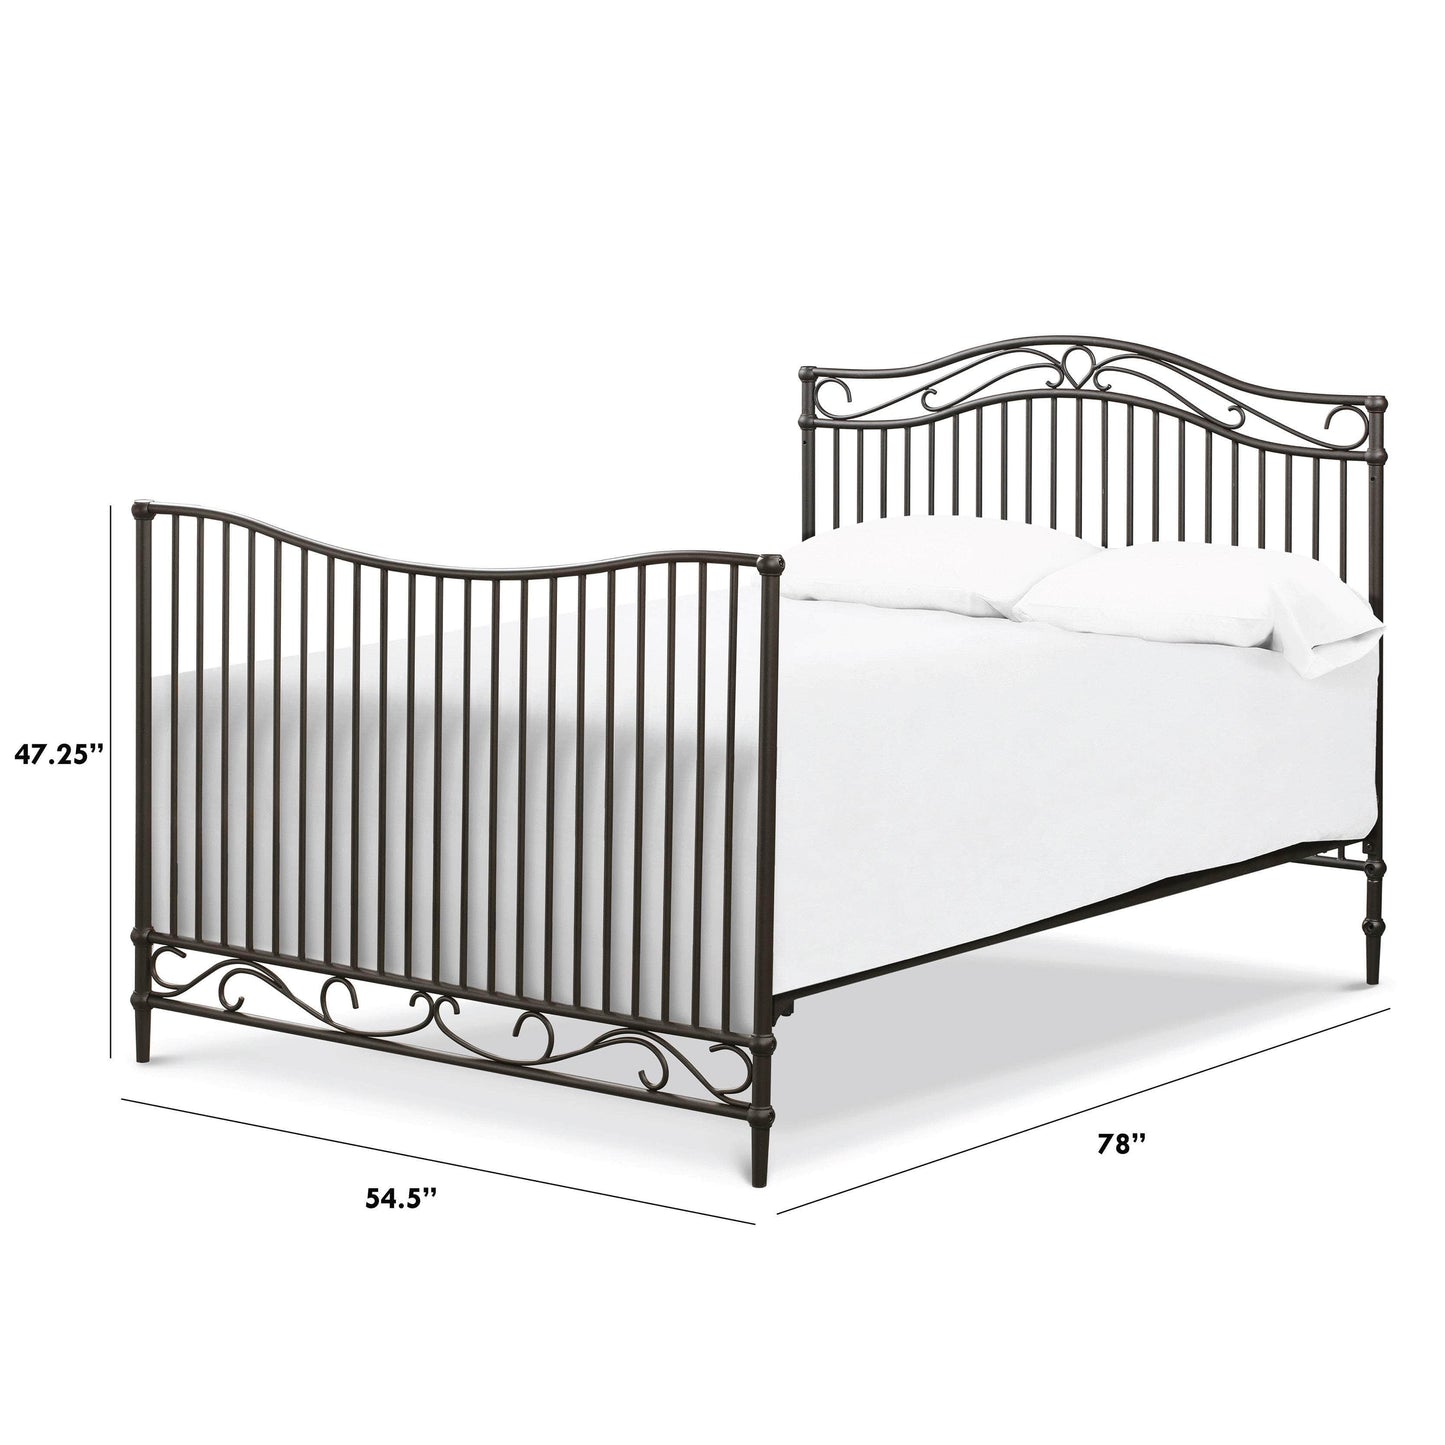 M21589UR,Noelle Full Size Bed Conversion Kit in Vintage Iron